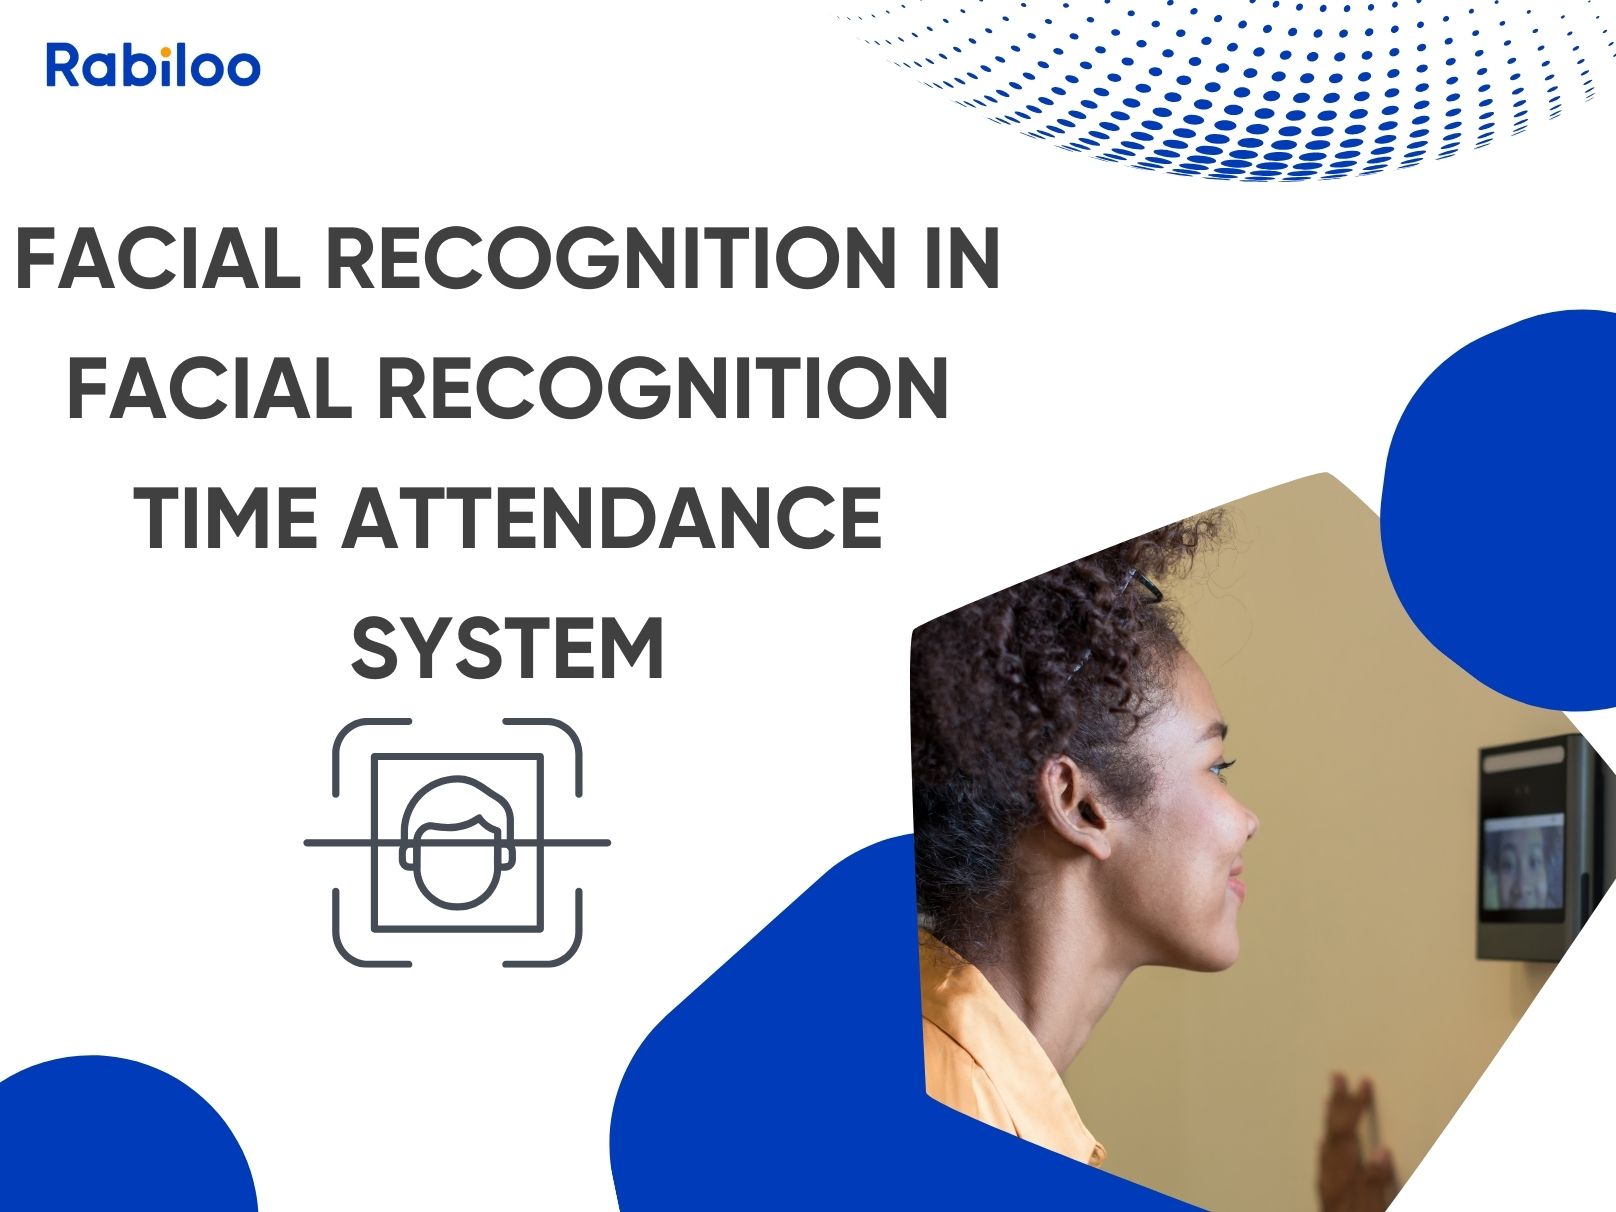 Facial recognition in facial recognition time attendance system